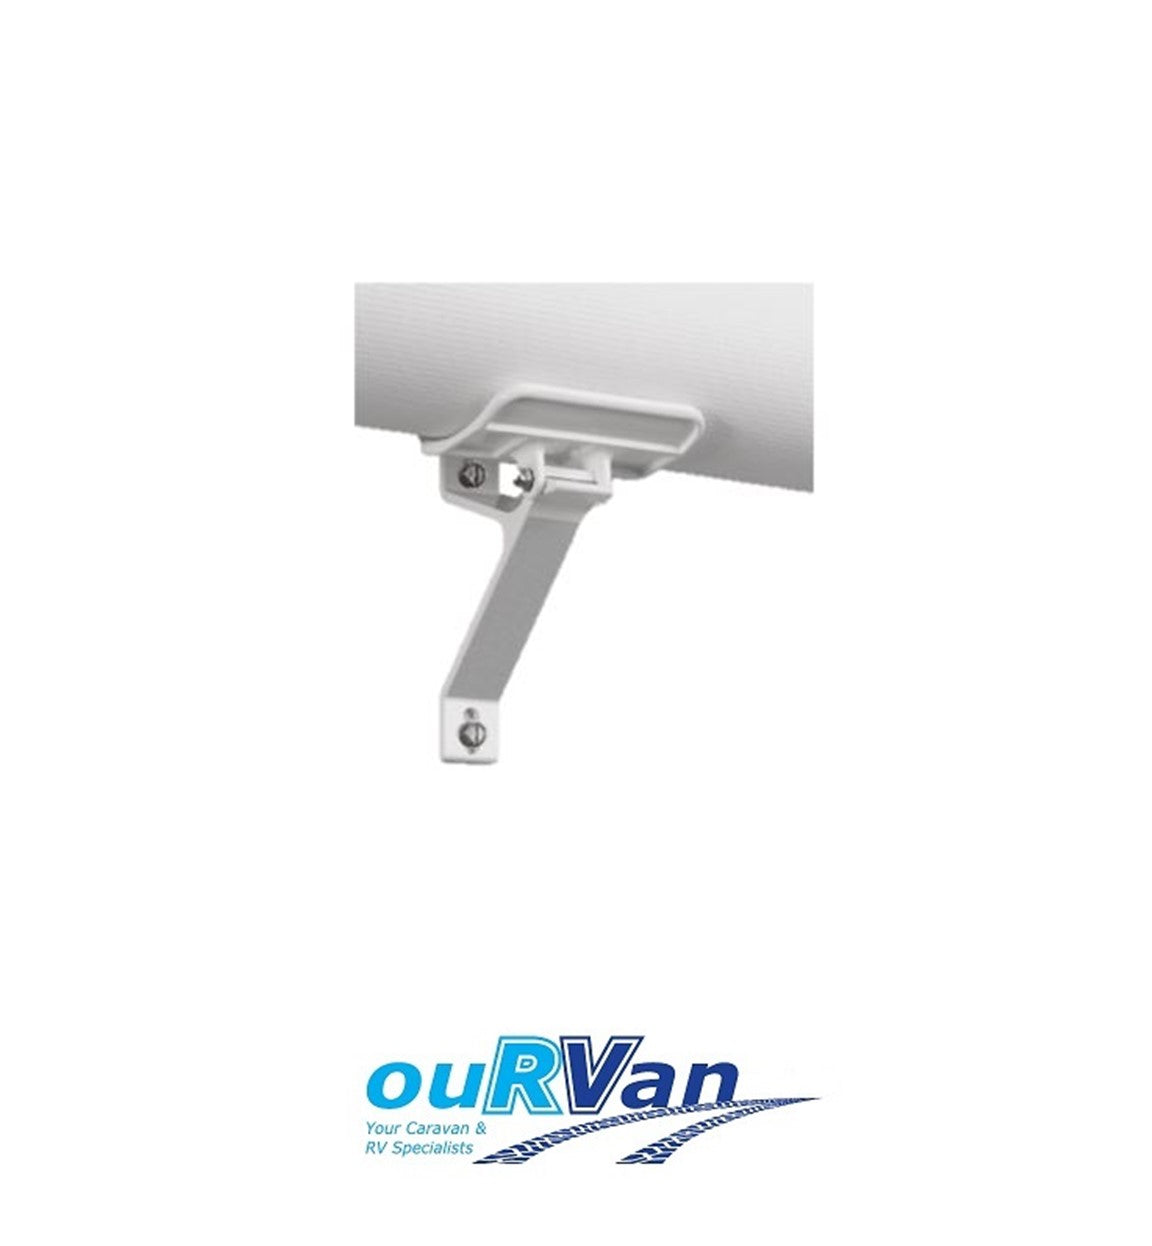 Carefree 902800w Automatic Awning Support Cradle White 001477 Caravan